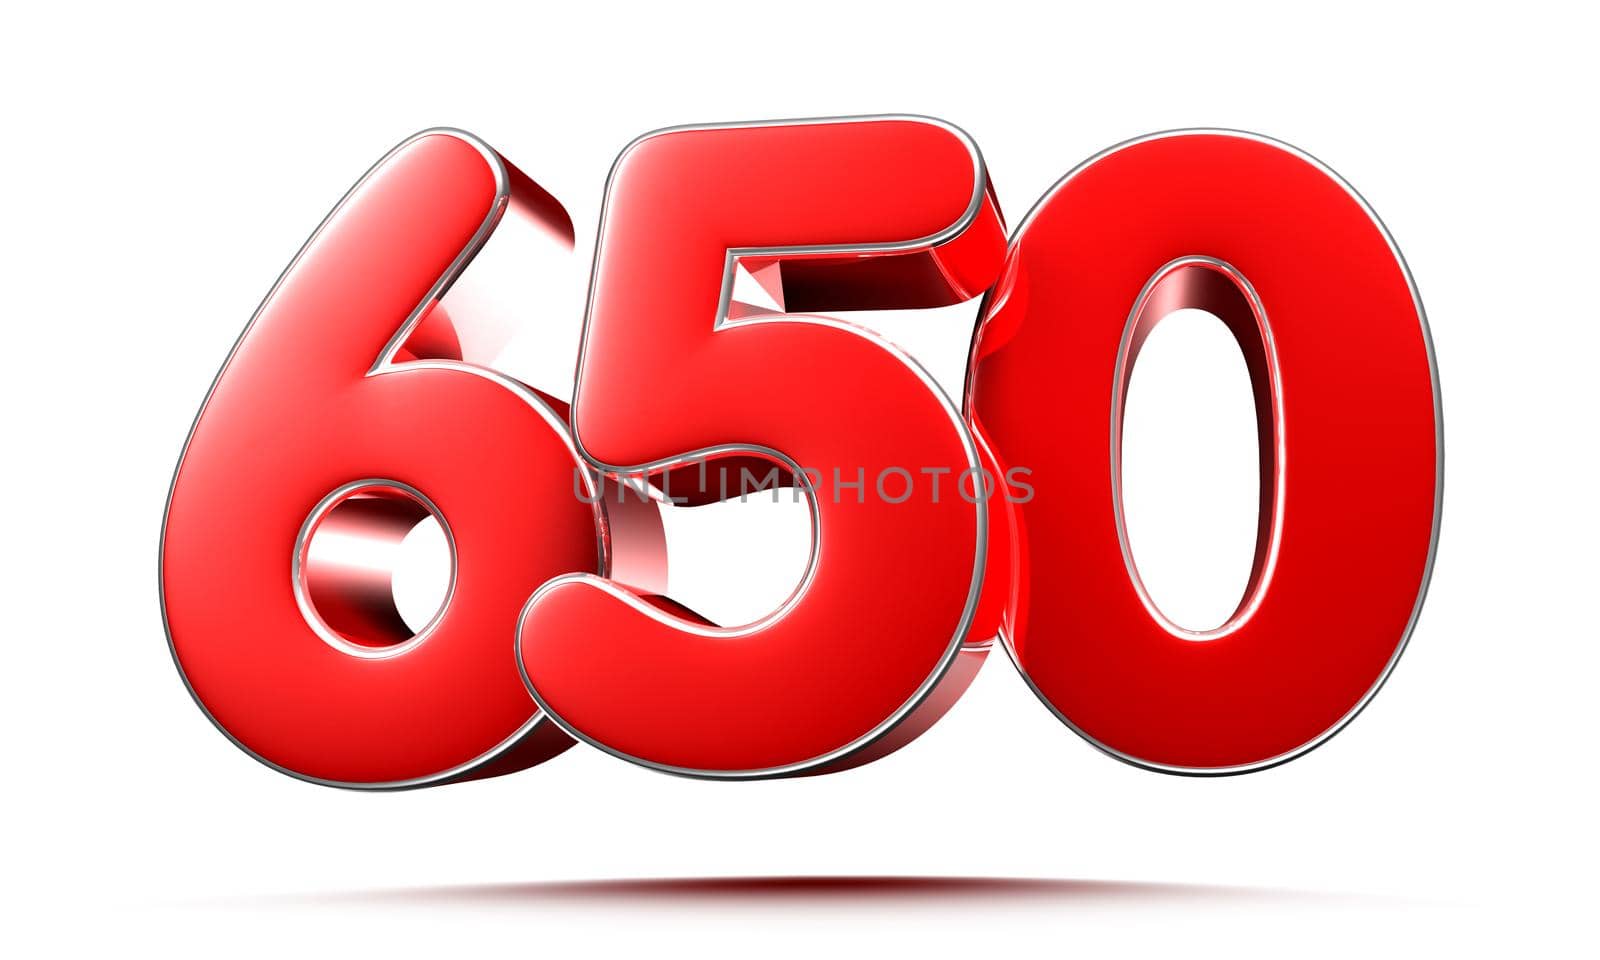 Rounded red numbers 650 on white background 3D illustration with clipping path